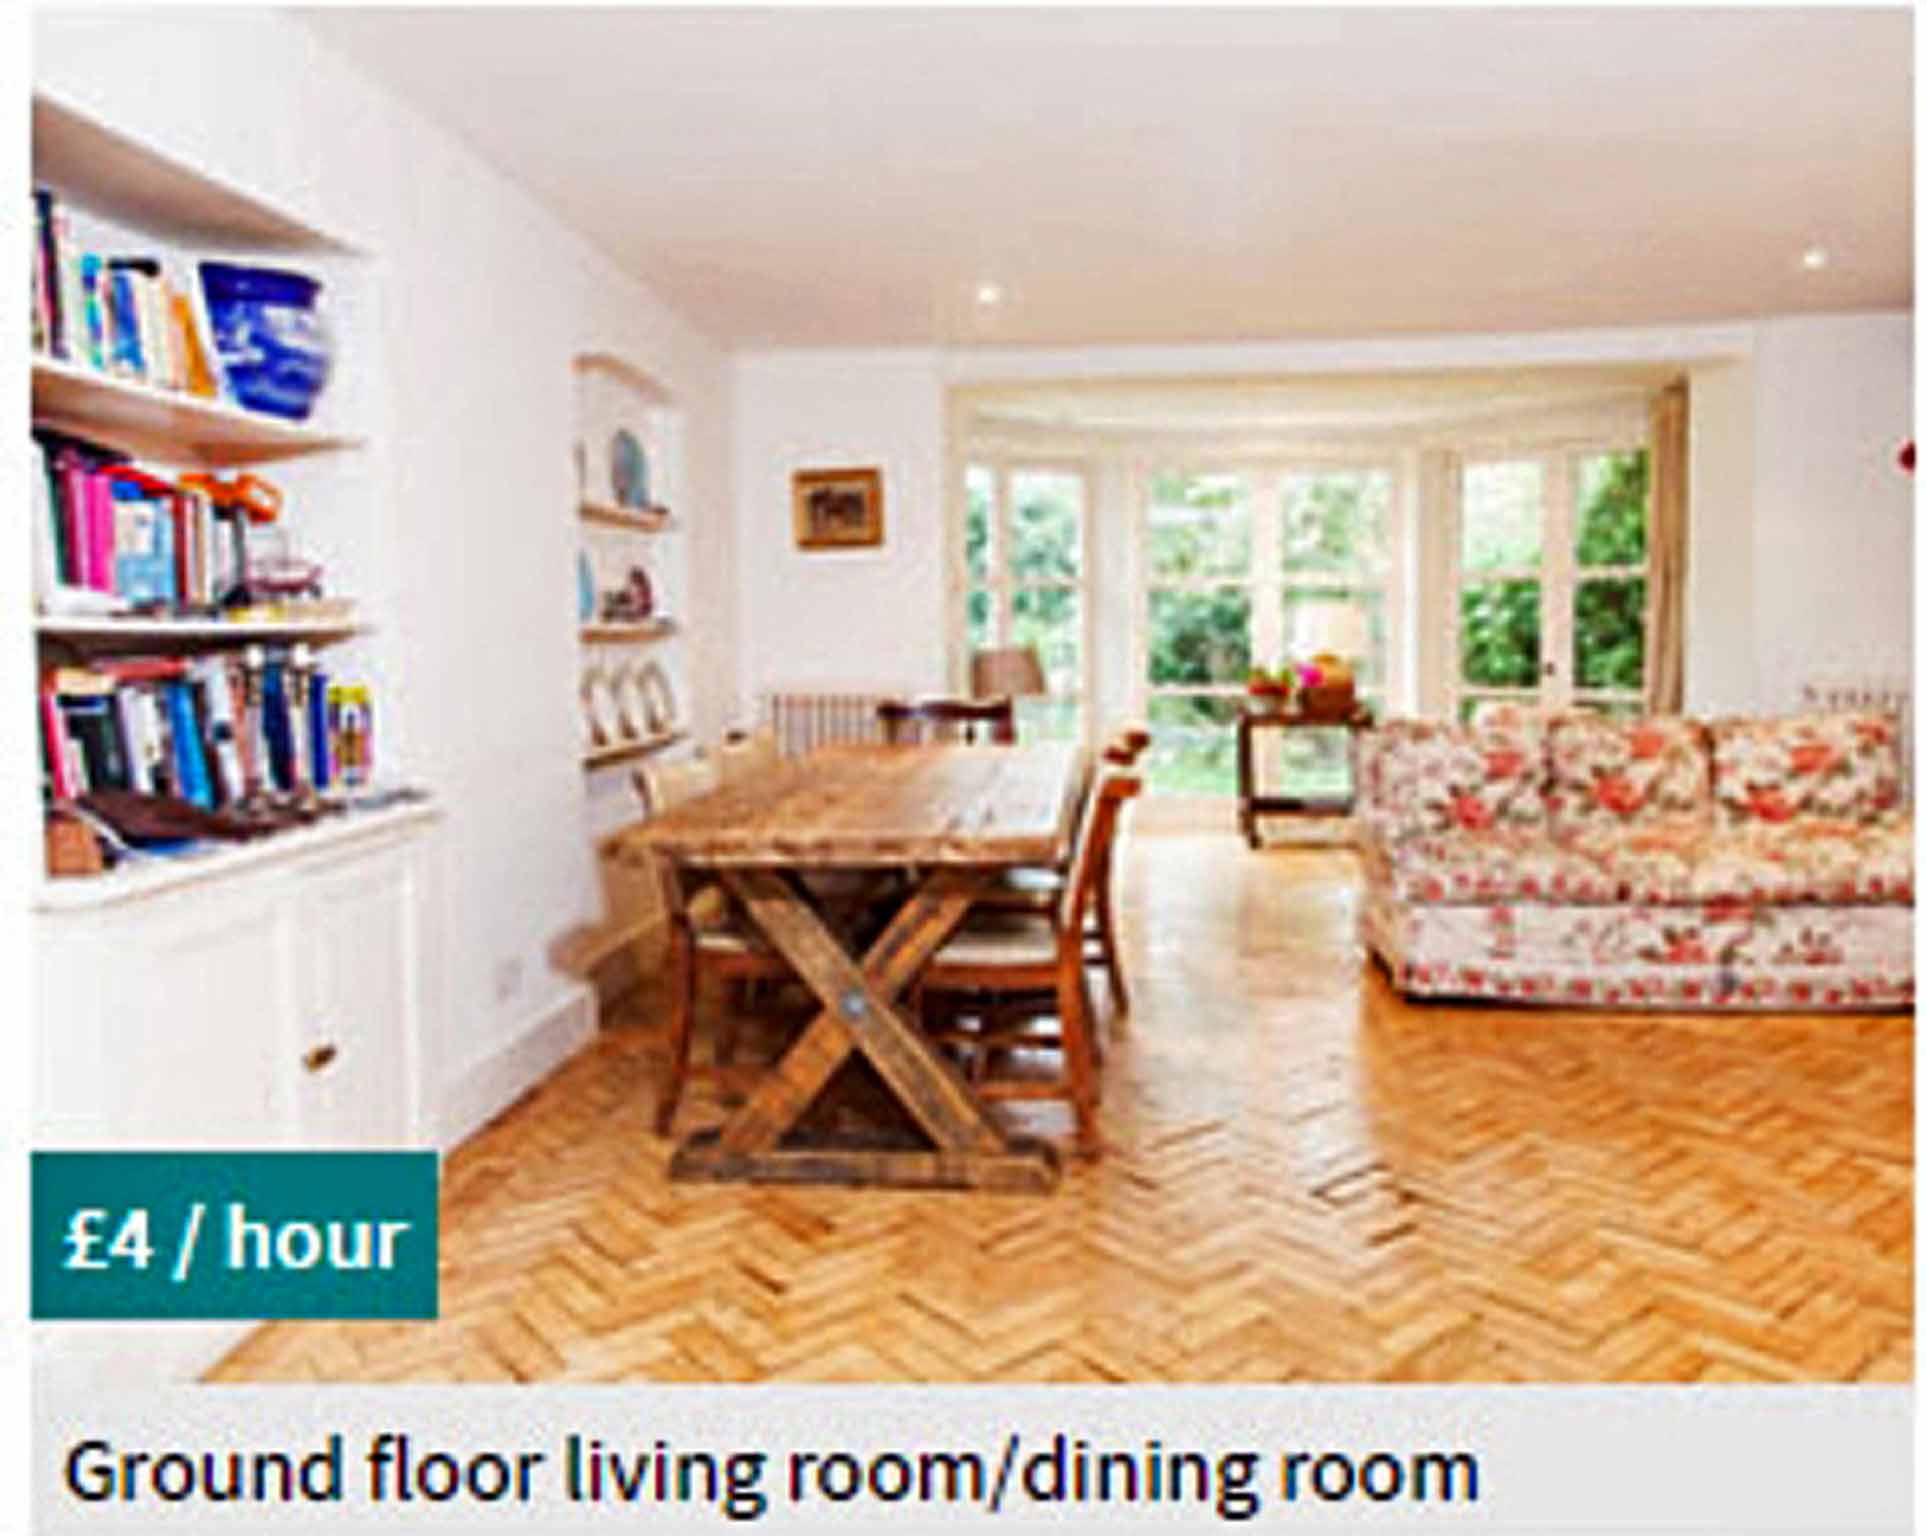 Nice and Vrumi: a room currently on offer on the company's website